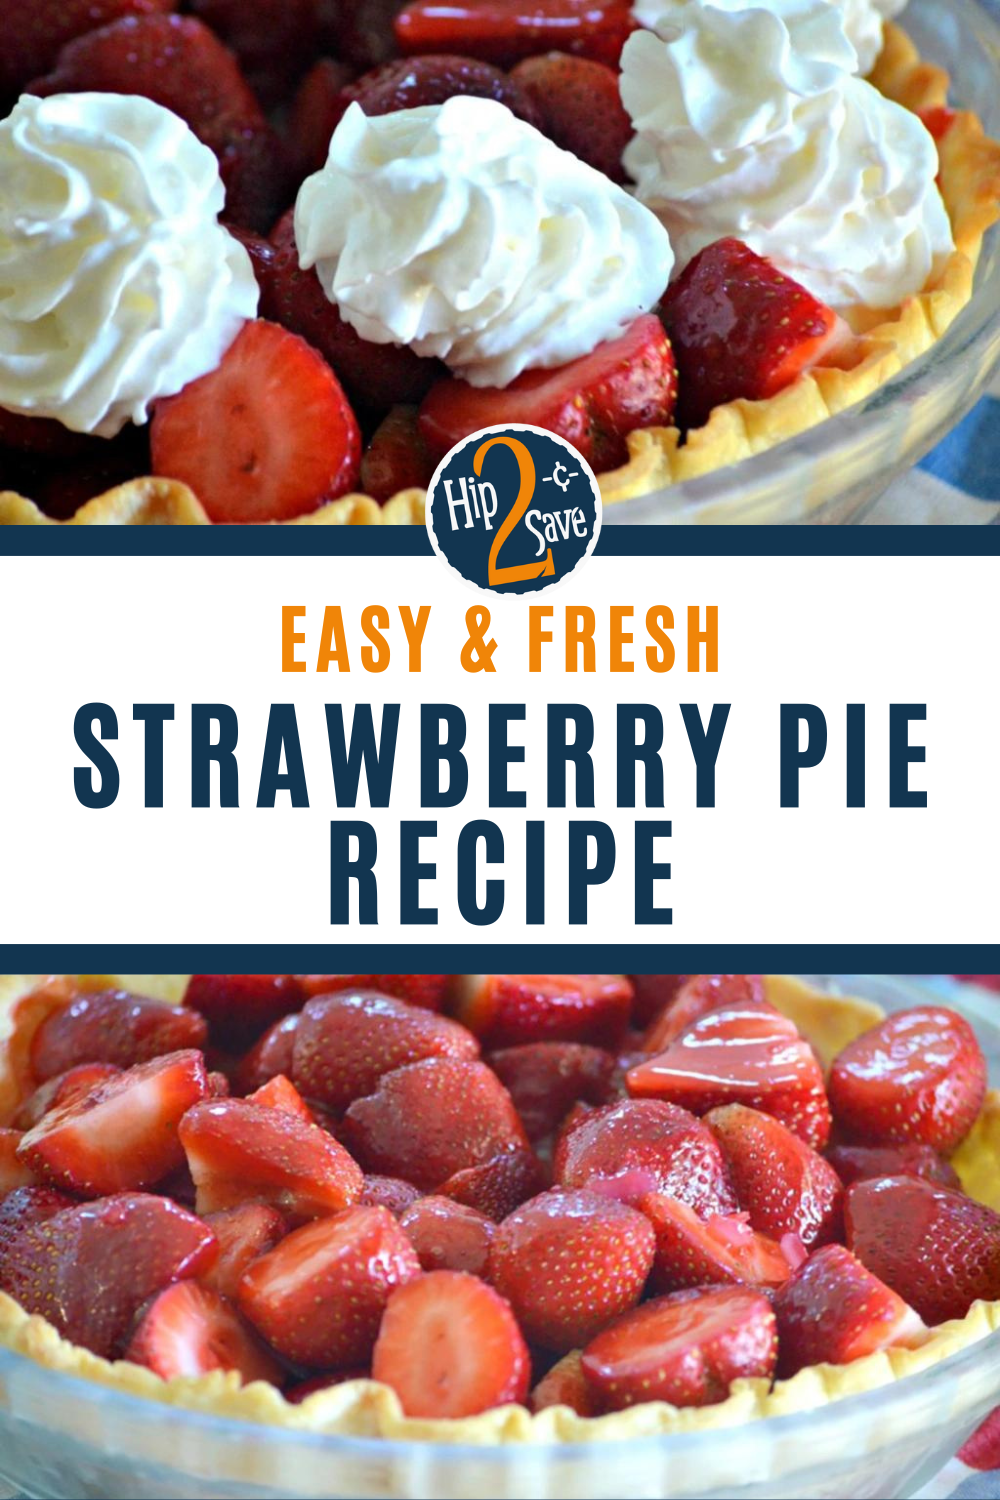 Easy & Fresh Strawberry Pie Recipe (Perfect for Cookouts!)